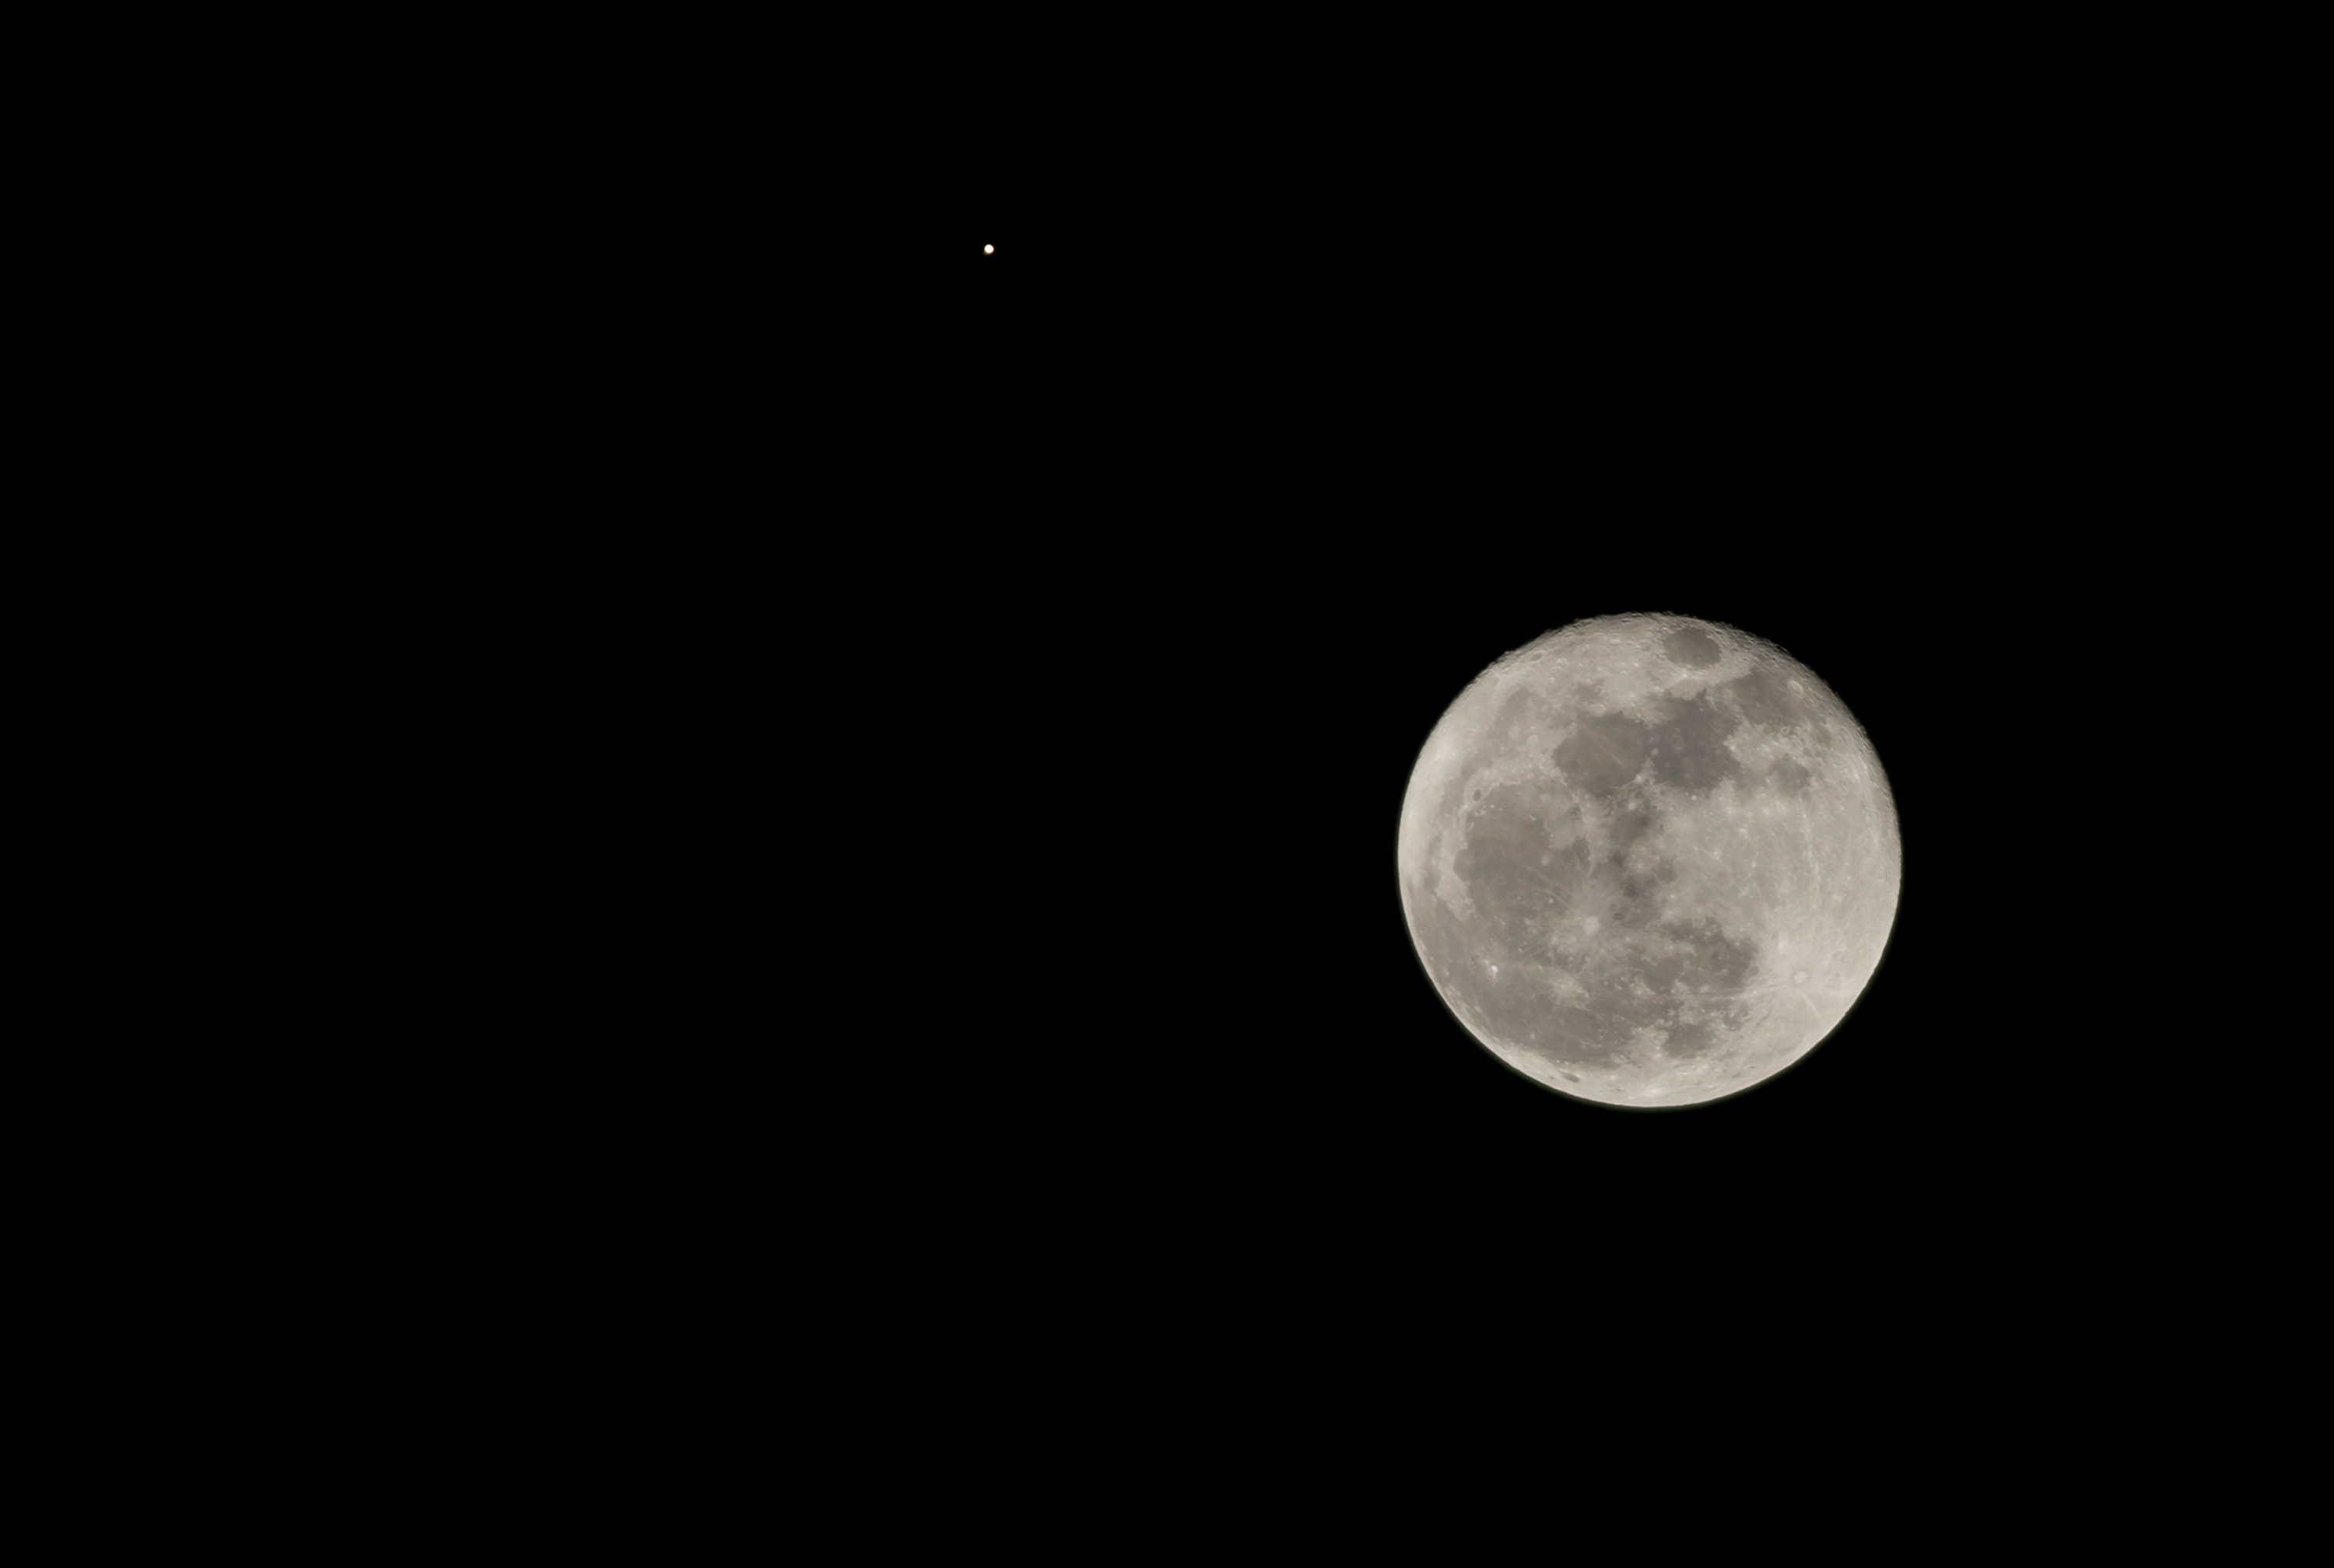 A view of the moon next to the planet Mars, as seen from the city of Bogotá on October 02, 2020.